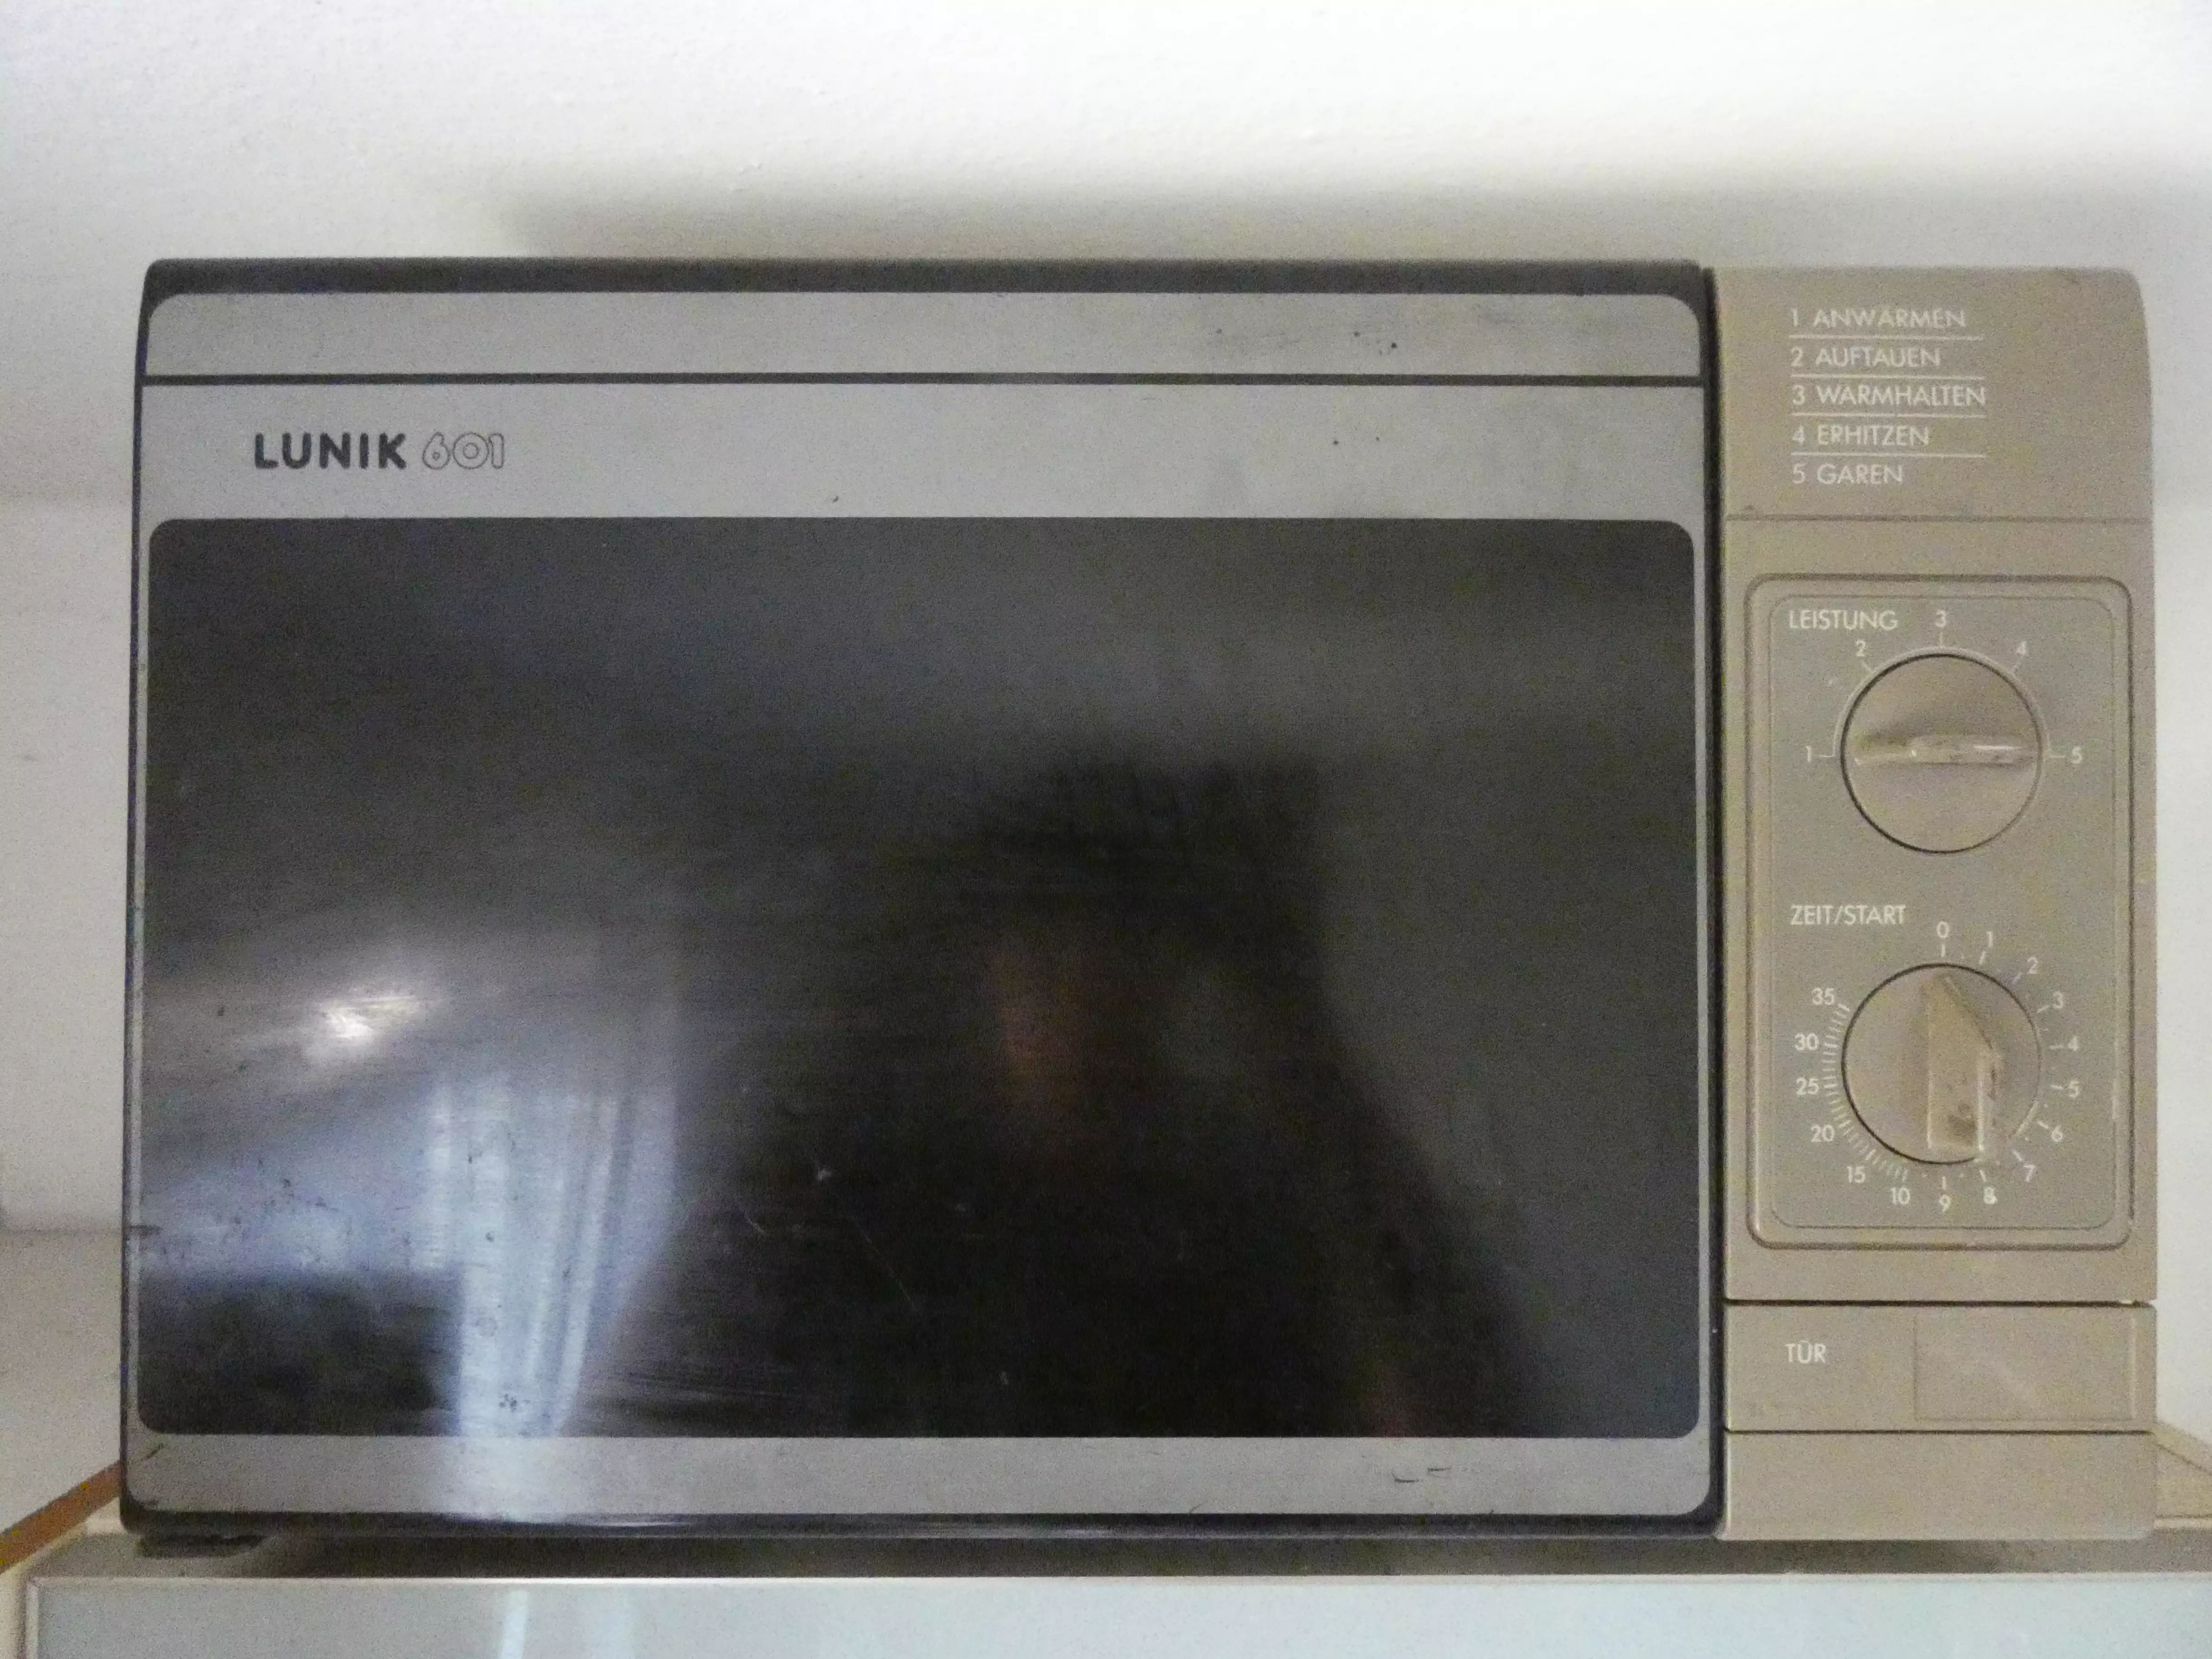 Photo of the front of a Lunik 601 microwave